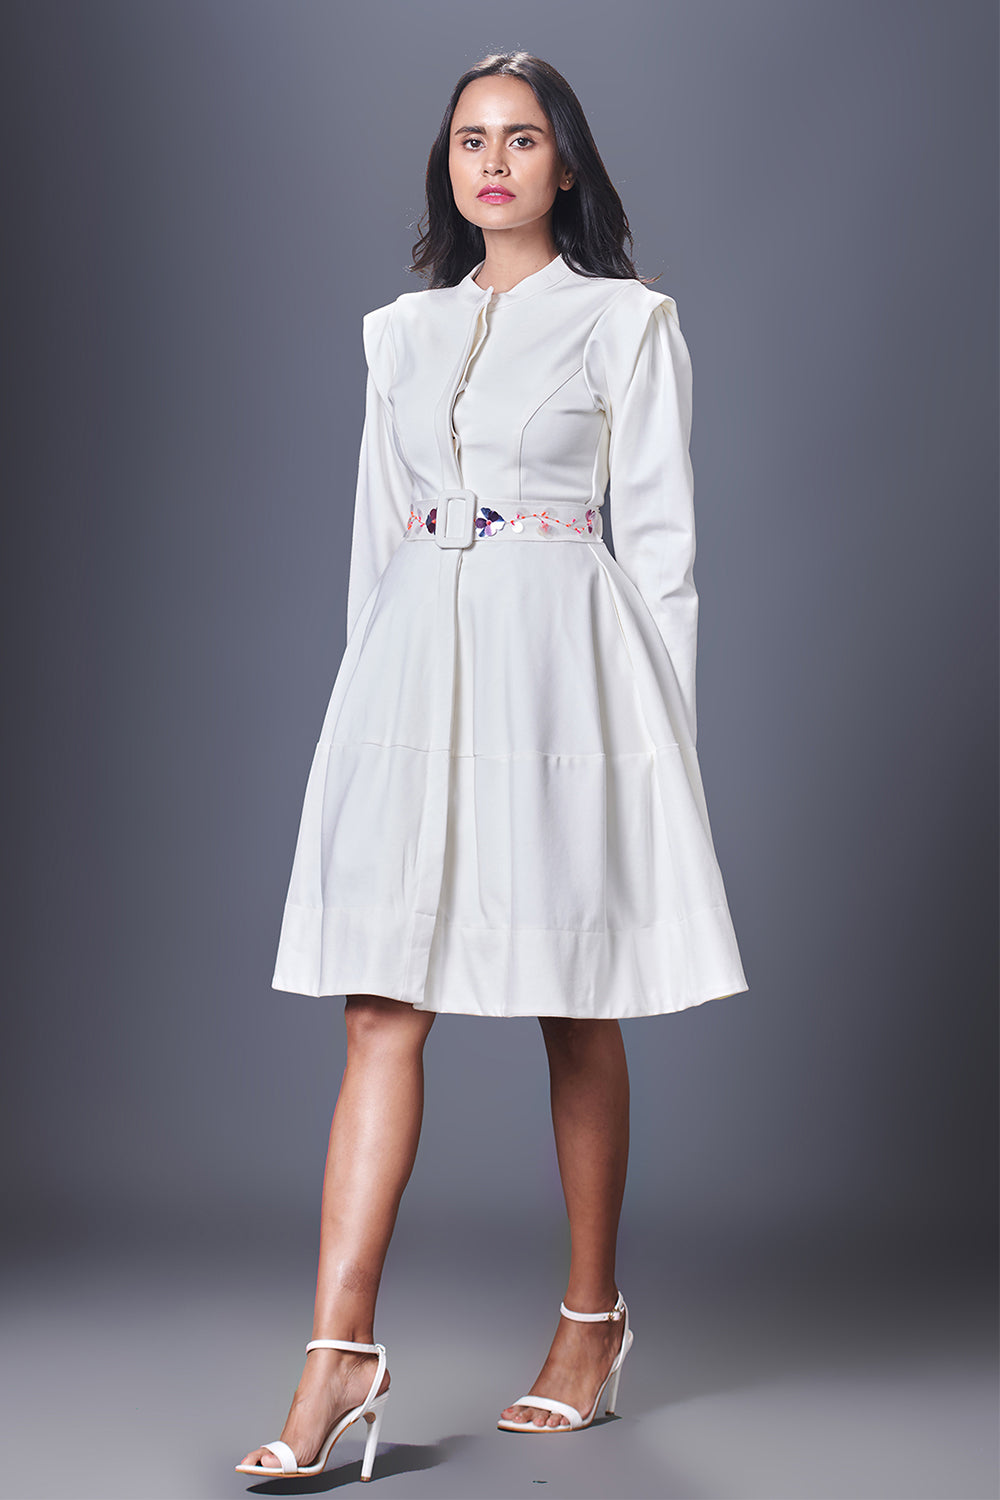 White Jacket Dress With Hand Embroidered Belt